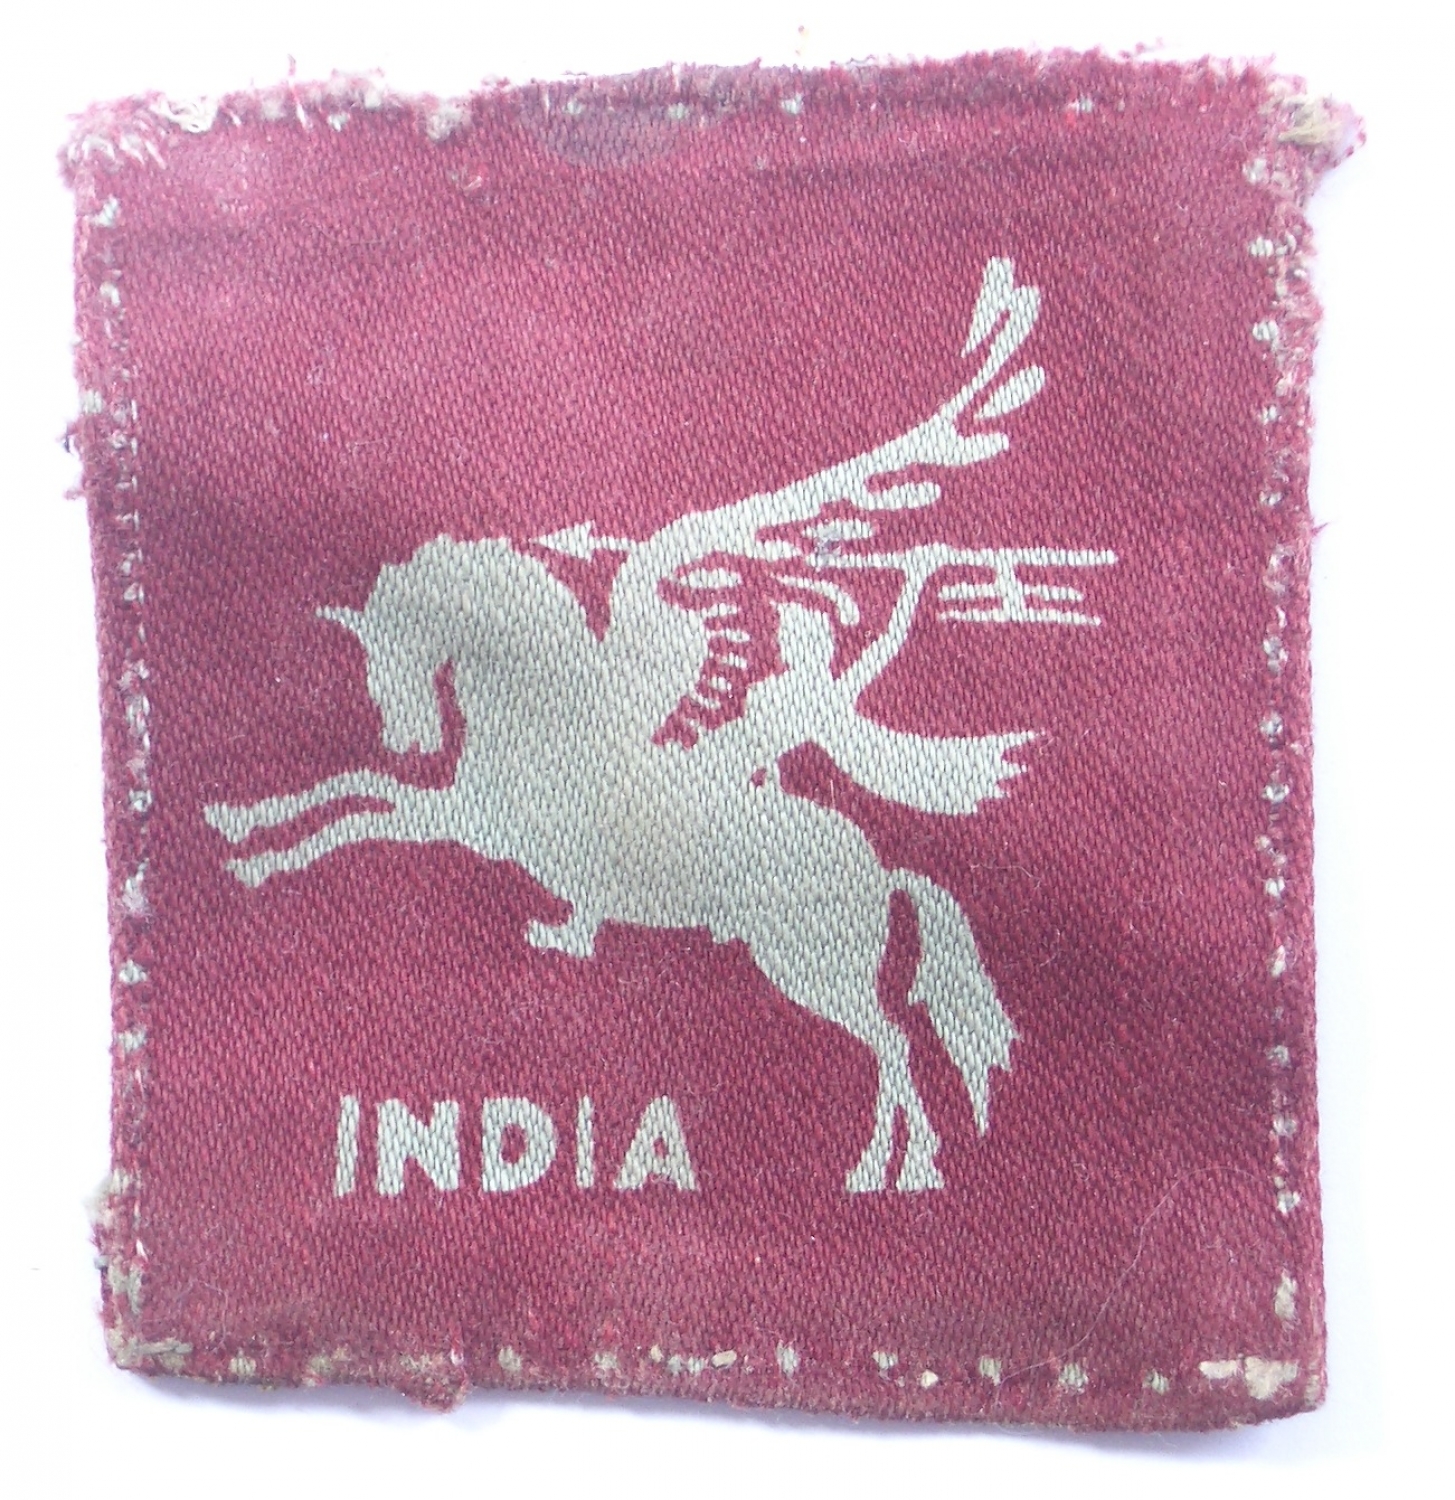 44th Indian Airborne Division formation sign